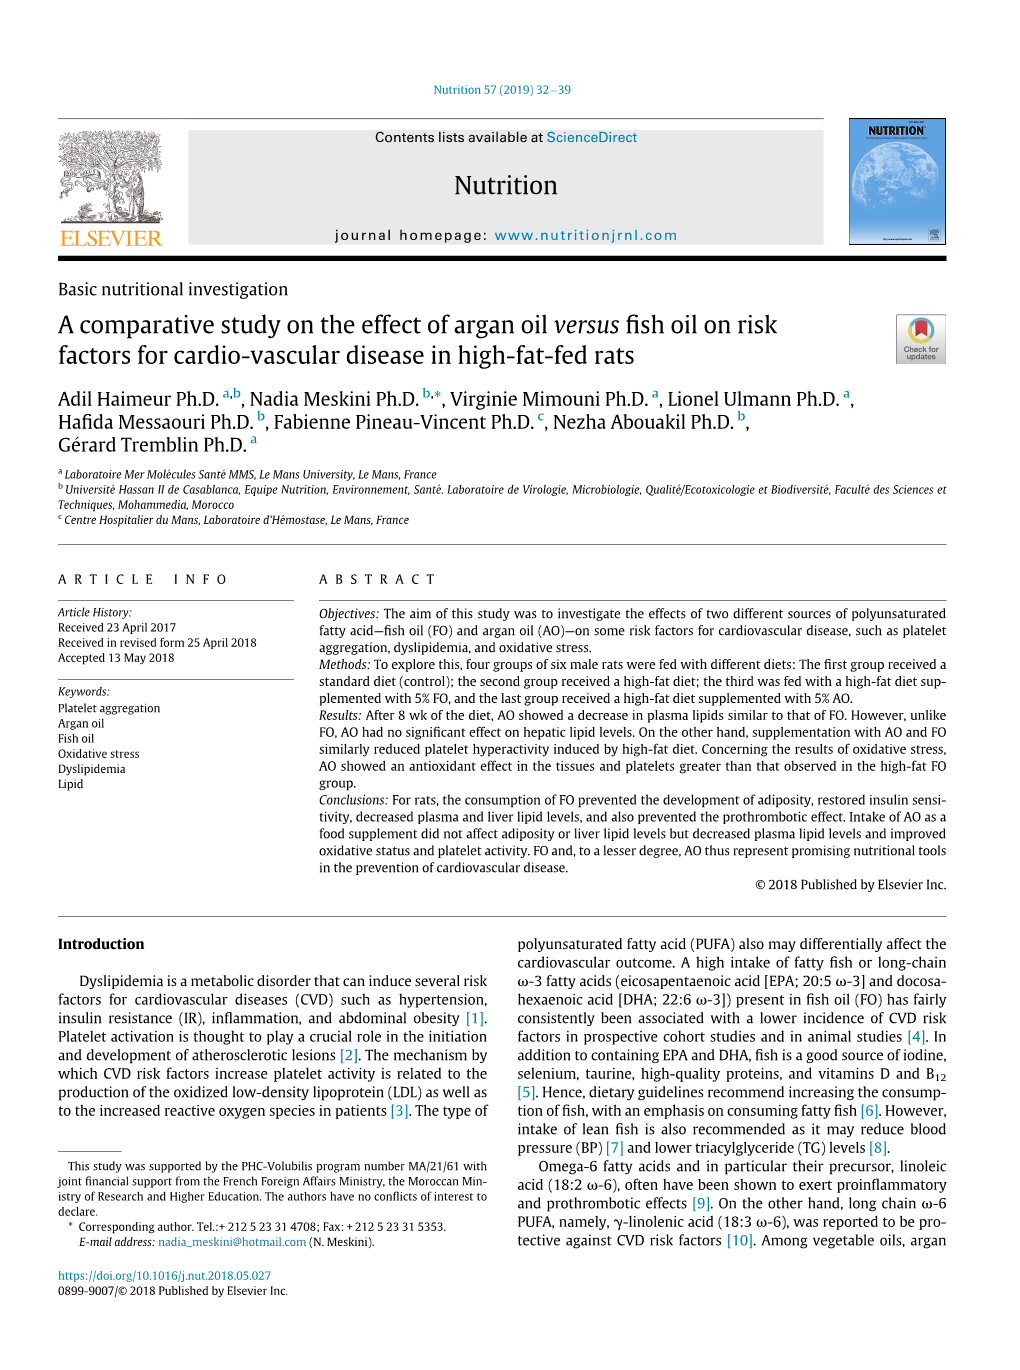 A Comparative Study on the Effect of Argan Oil Versus Fish Oil on Risk